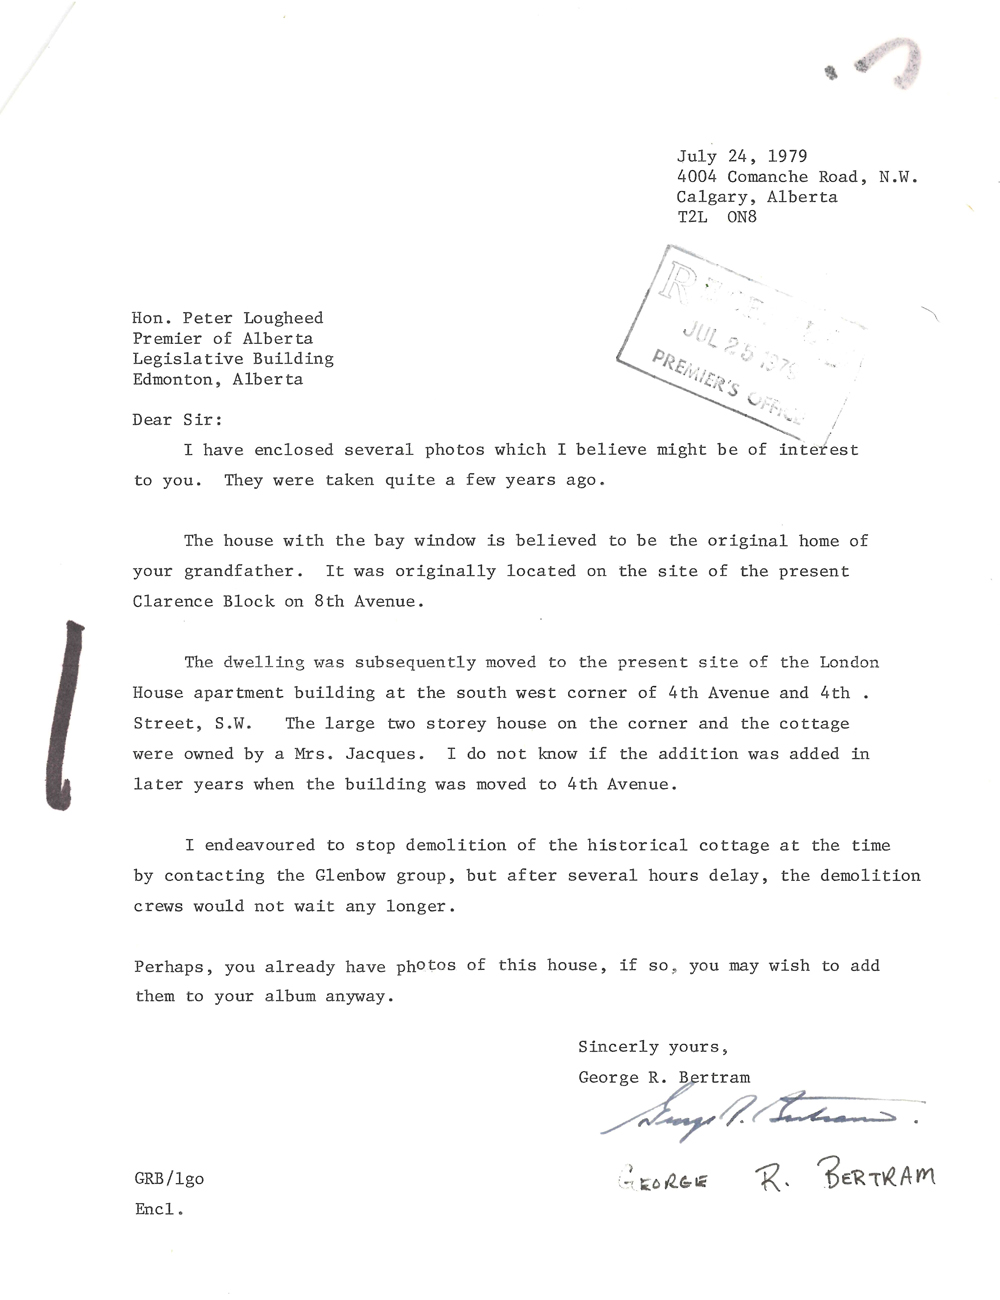 July 1979 letter from George Bertram to Peter Lougheed that accompanied photos sent of the Lougheed original home.